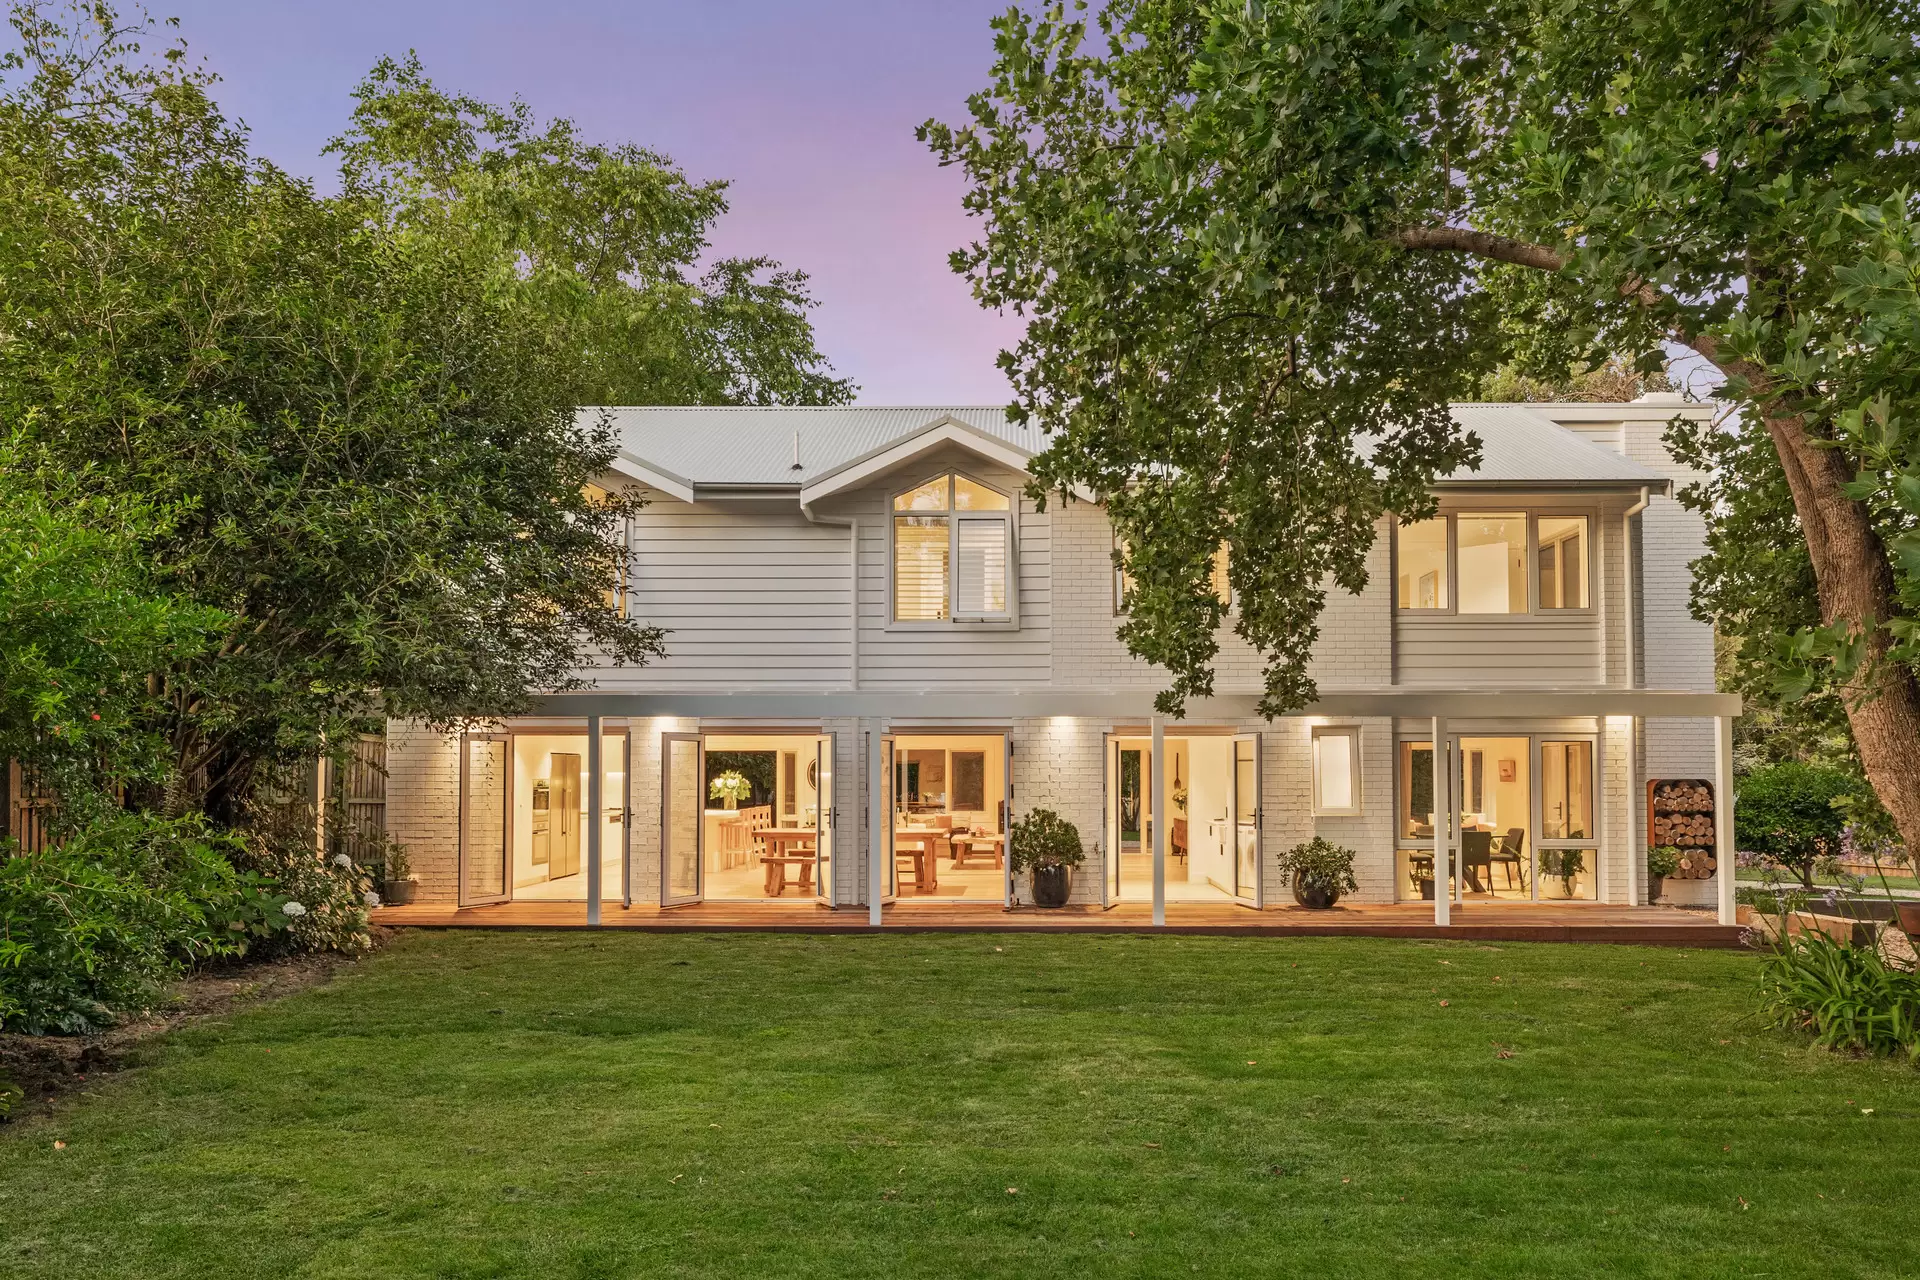 Photo #33: 9 Bradman Avenue, Bowral - Sold by Drew Lindsay Sotheby's International Realty